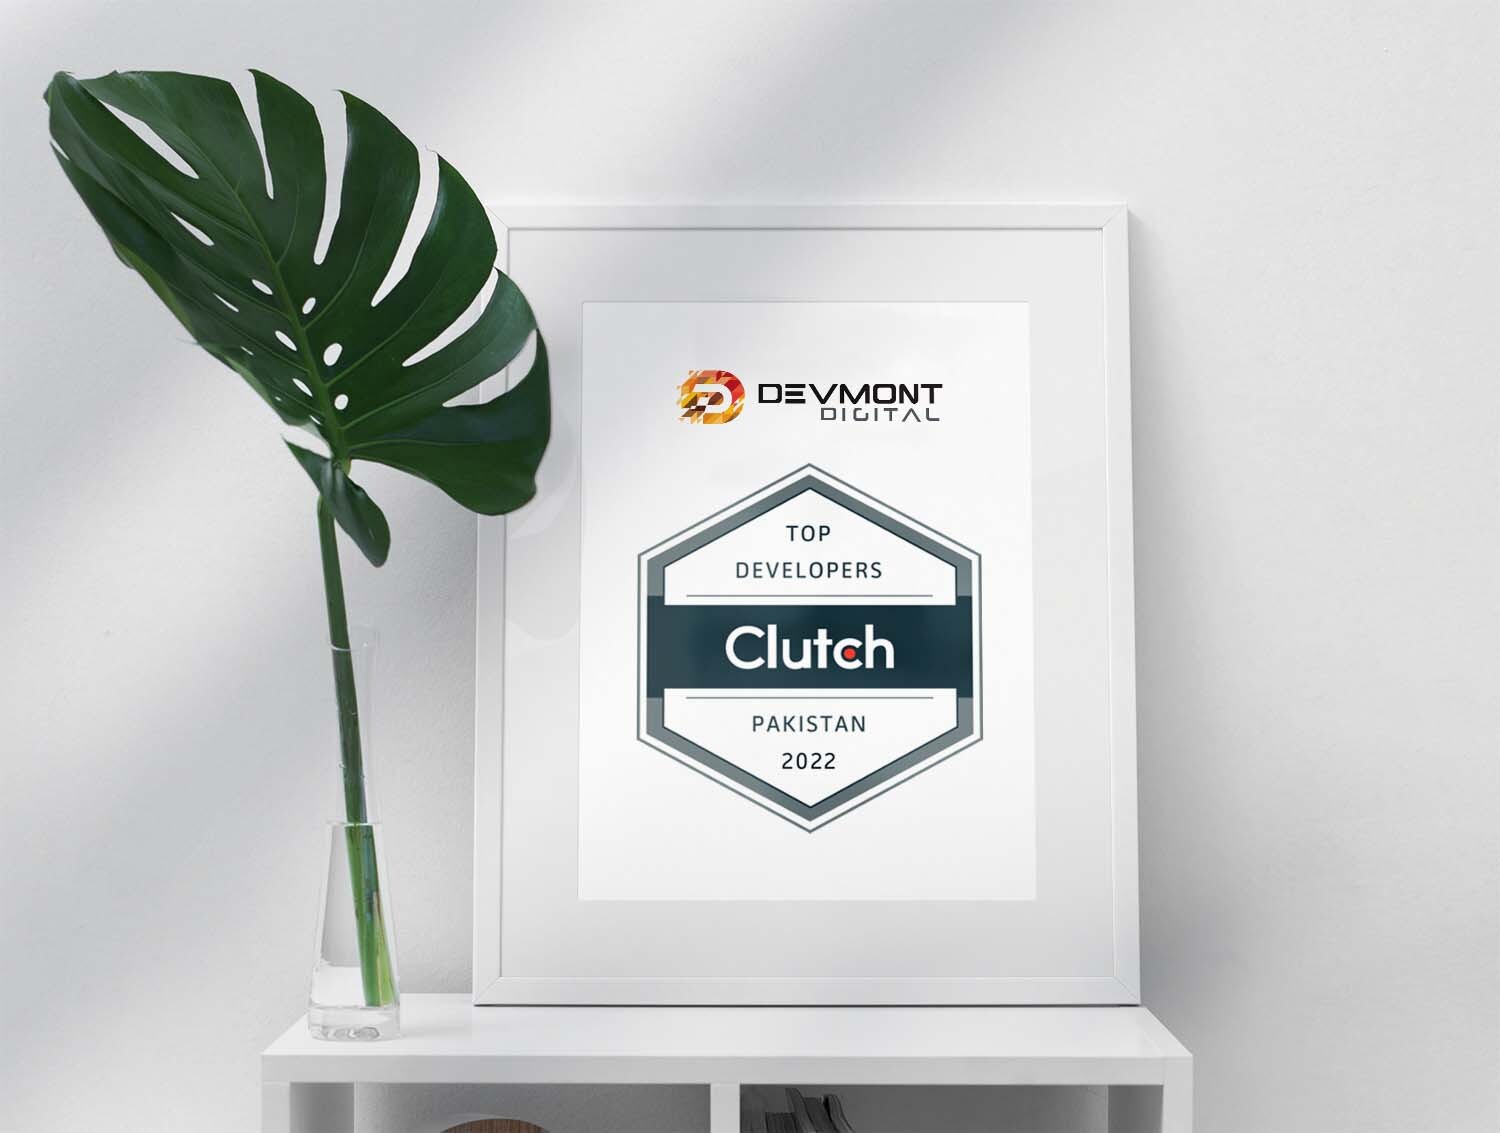 Clutch Awards Devmont Digital As One Of Pakistan’s Top E-Commerce Developers for 2022